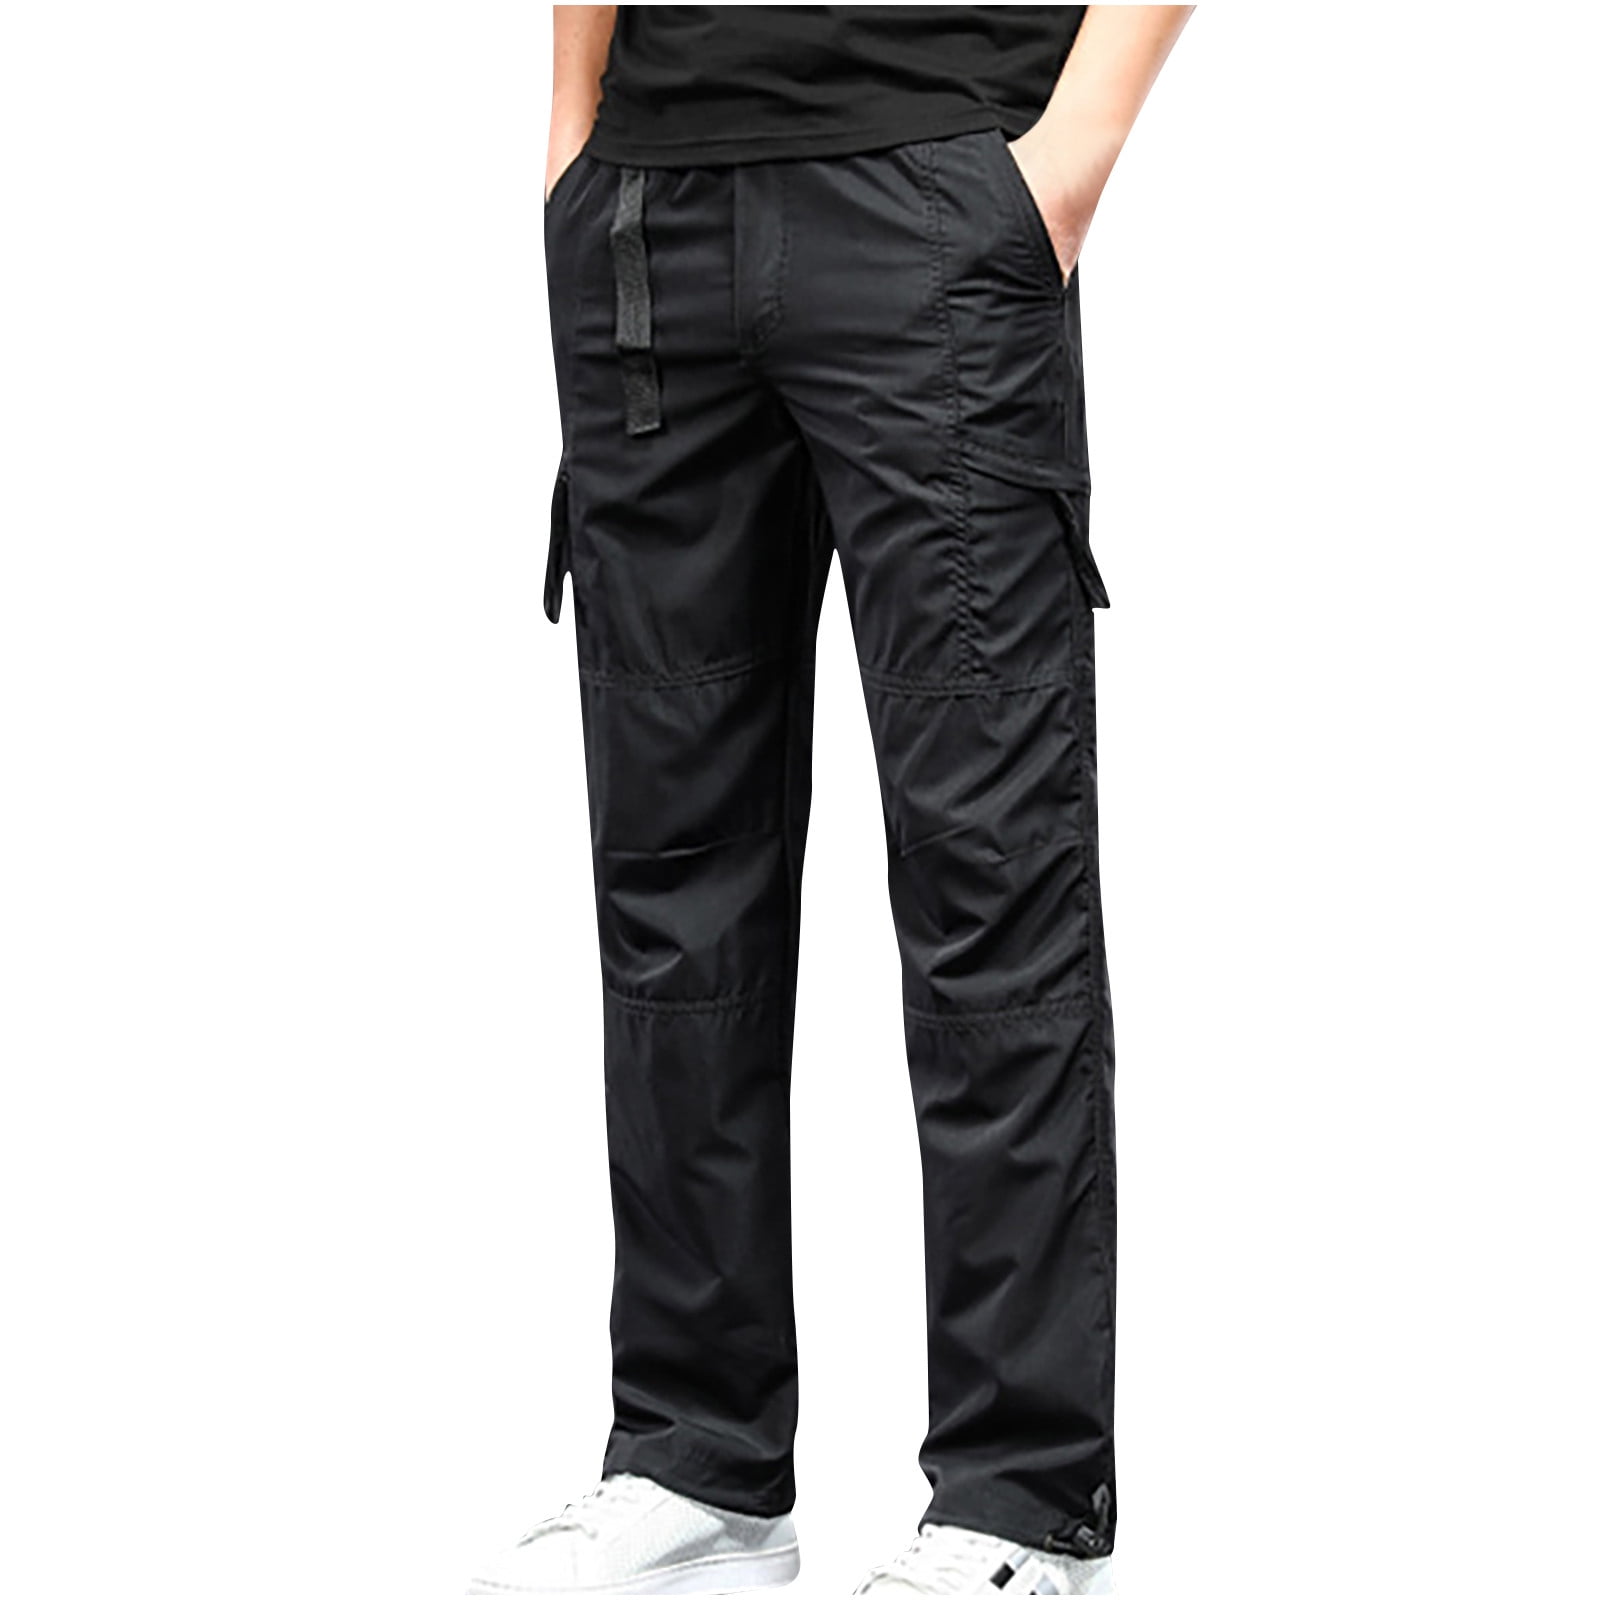 Clothing Arts Mens Pickpocket Proof Pants Size 40 X 32 Cargo P